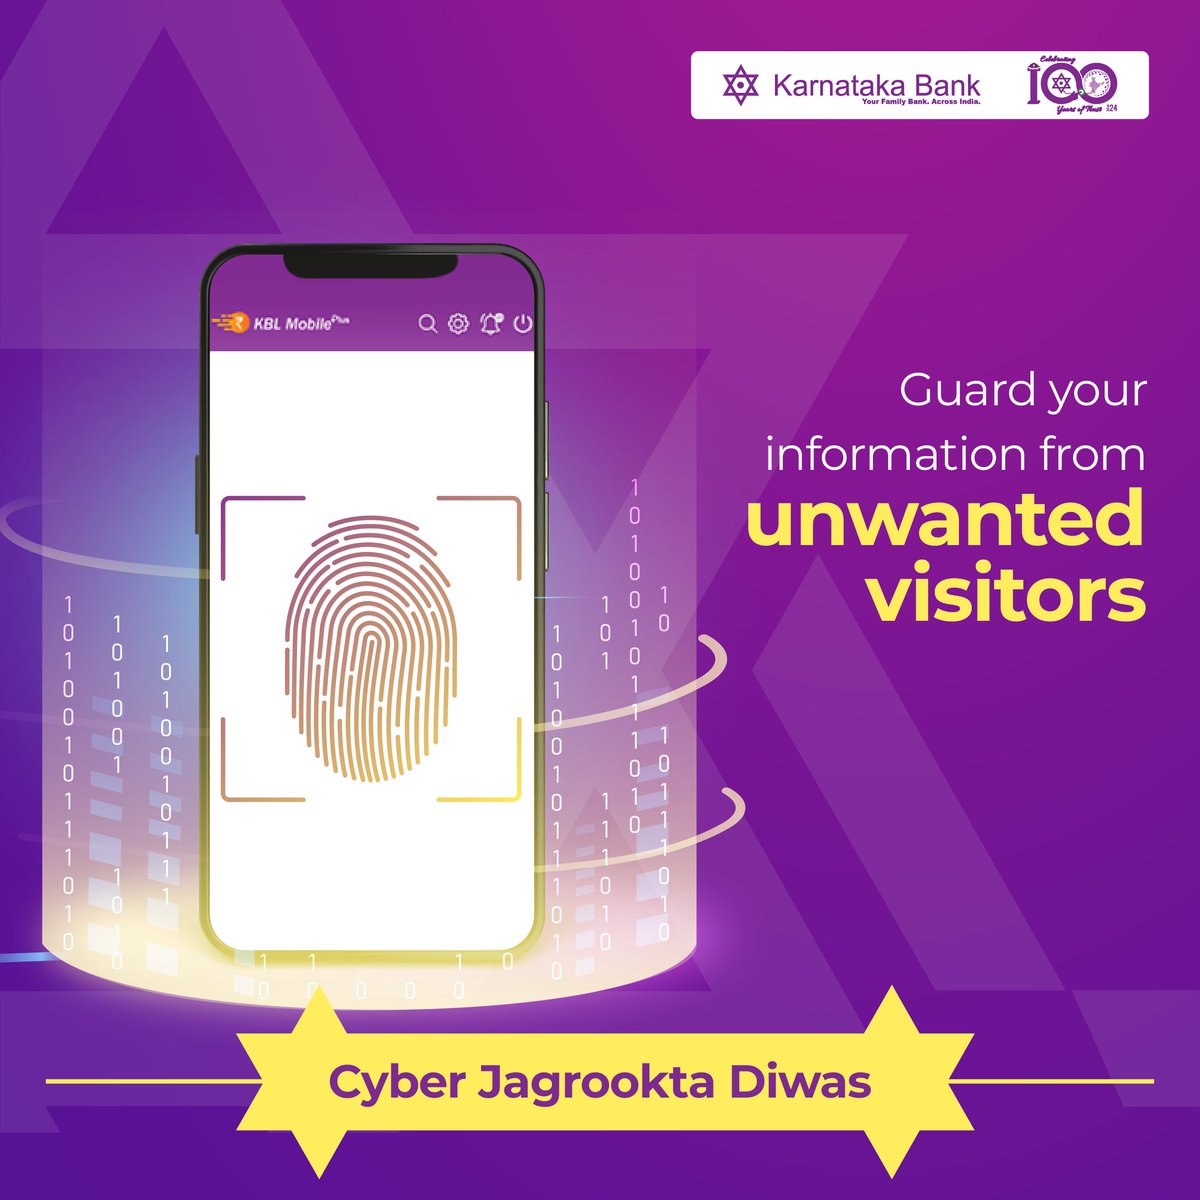 Guard Your Digital Fortress! 
Strengthen Your Defense with Strong Passwords and Cyber Vigilance.

For more such cyber security tips, visit our website:
karnatakabank.com/customer-educa…

#karnatakabank #cyberjagrooktadiwas #BeSafe #bankingfraud #fraudalert #fraudawareness #banking